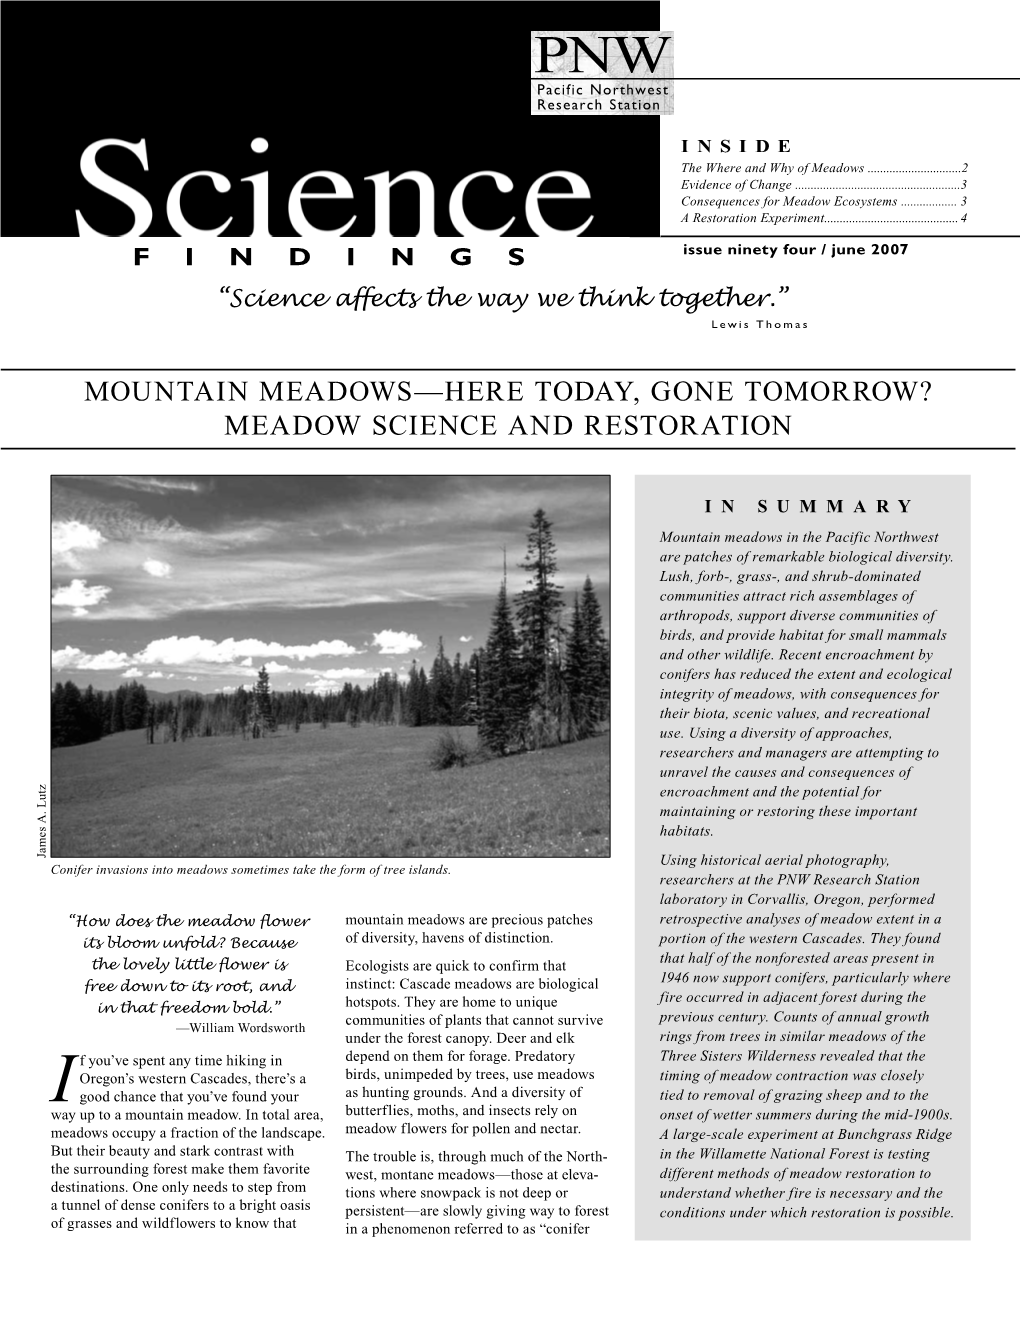 Mountain Meadows--Here Today, Gone Tomorrow? Meadow Science